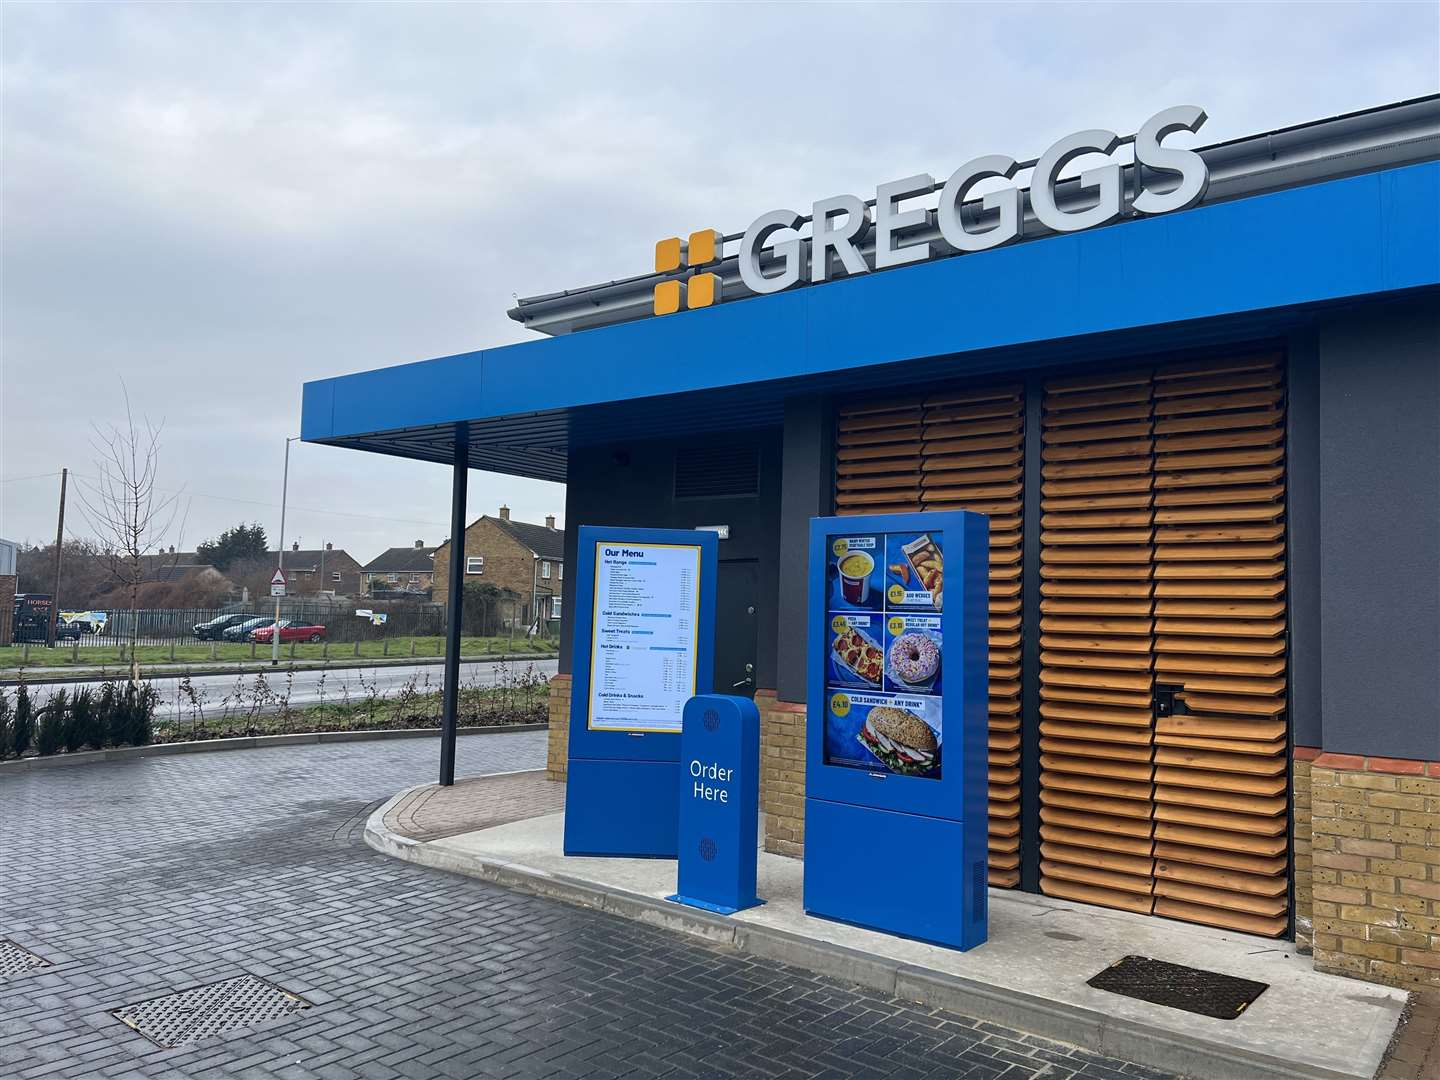 Greggs would like to trial a 24-hour drive-thru